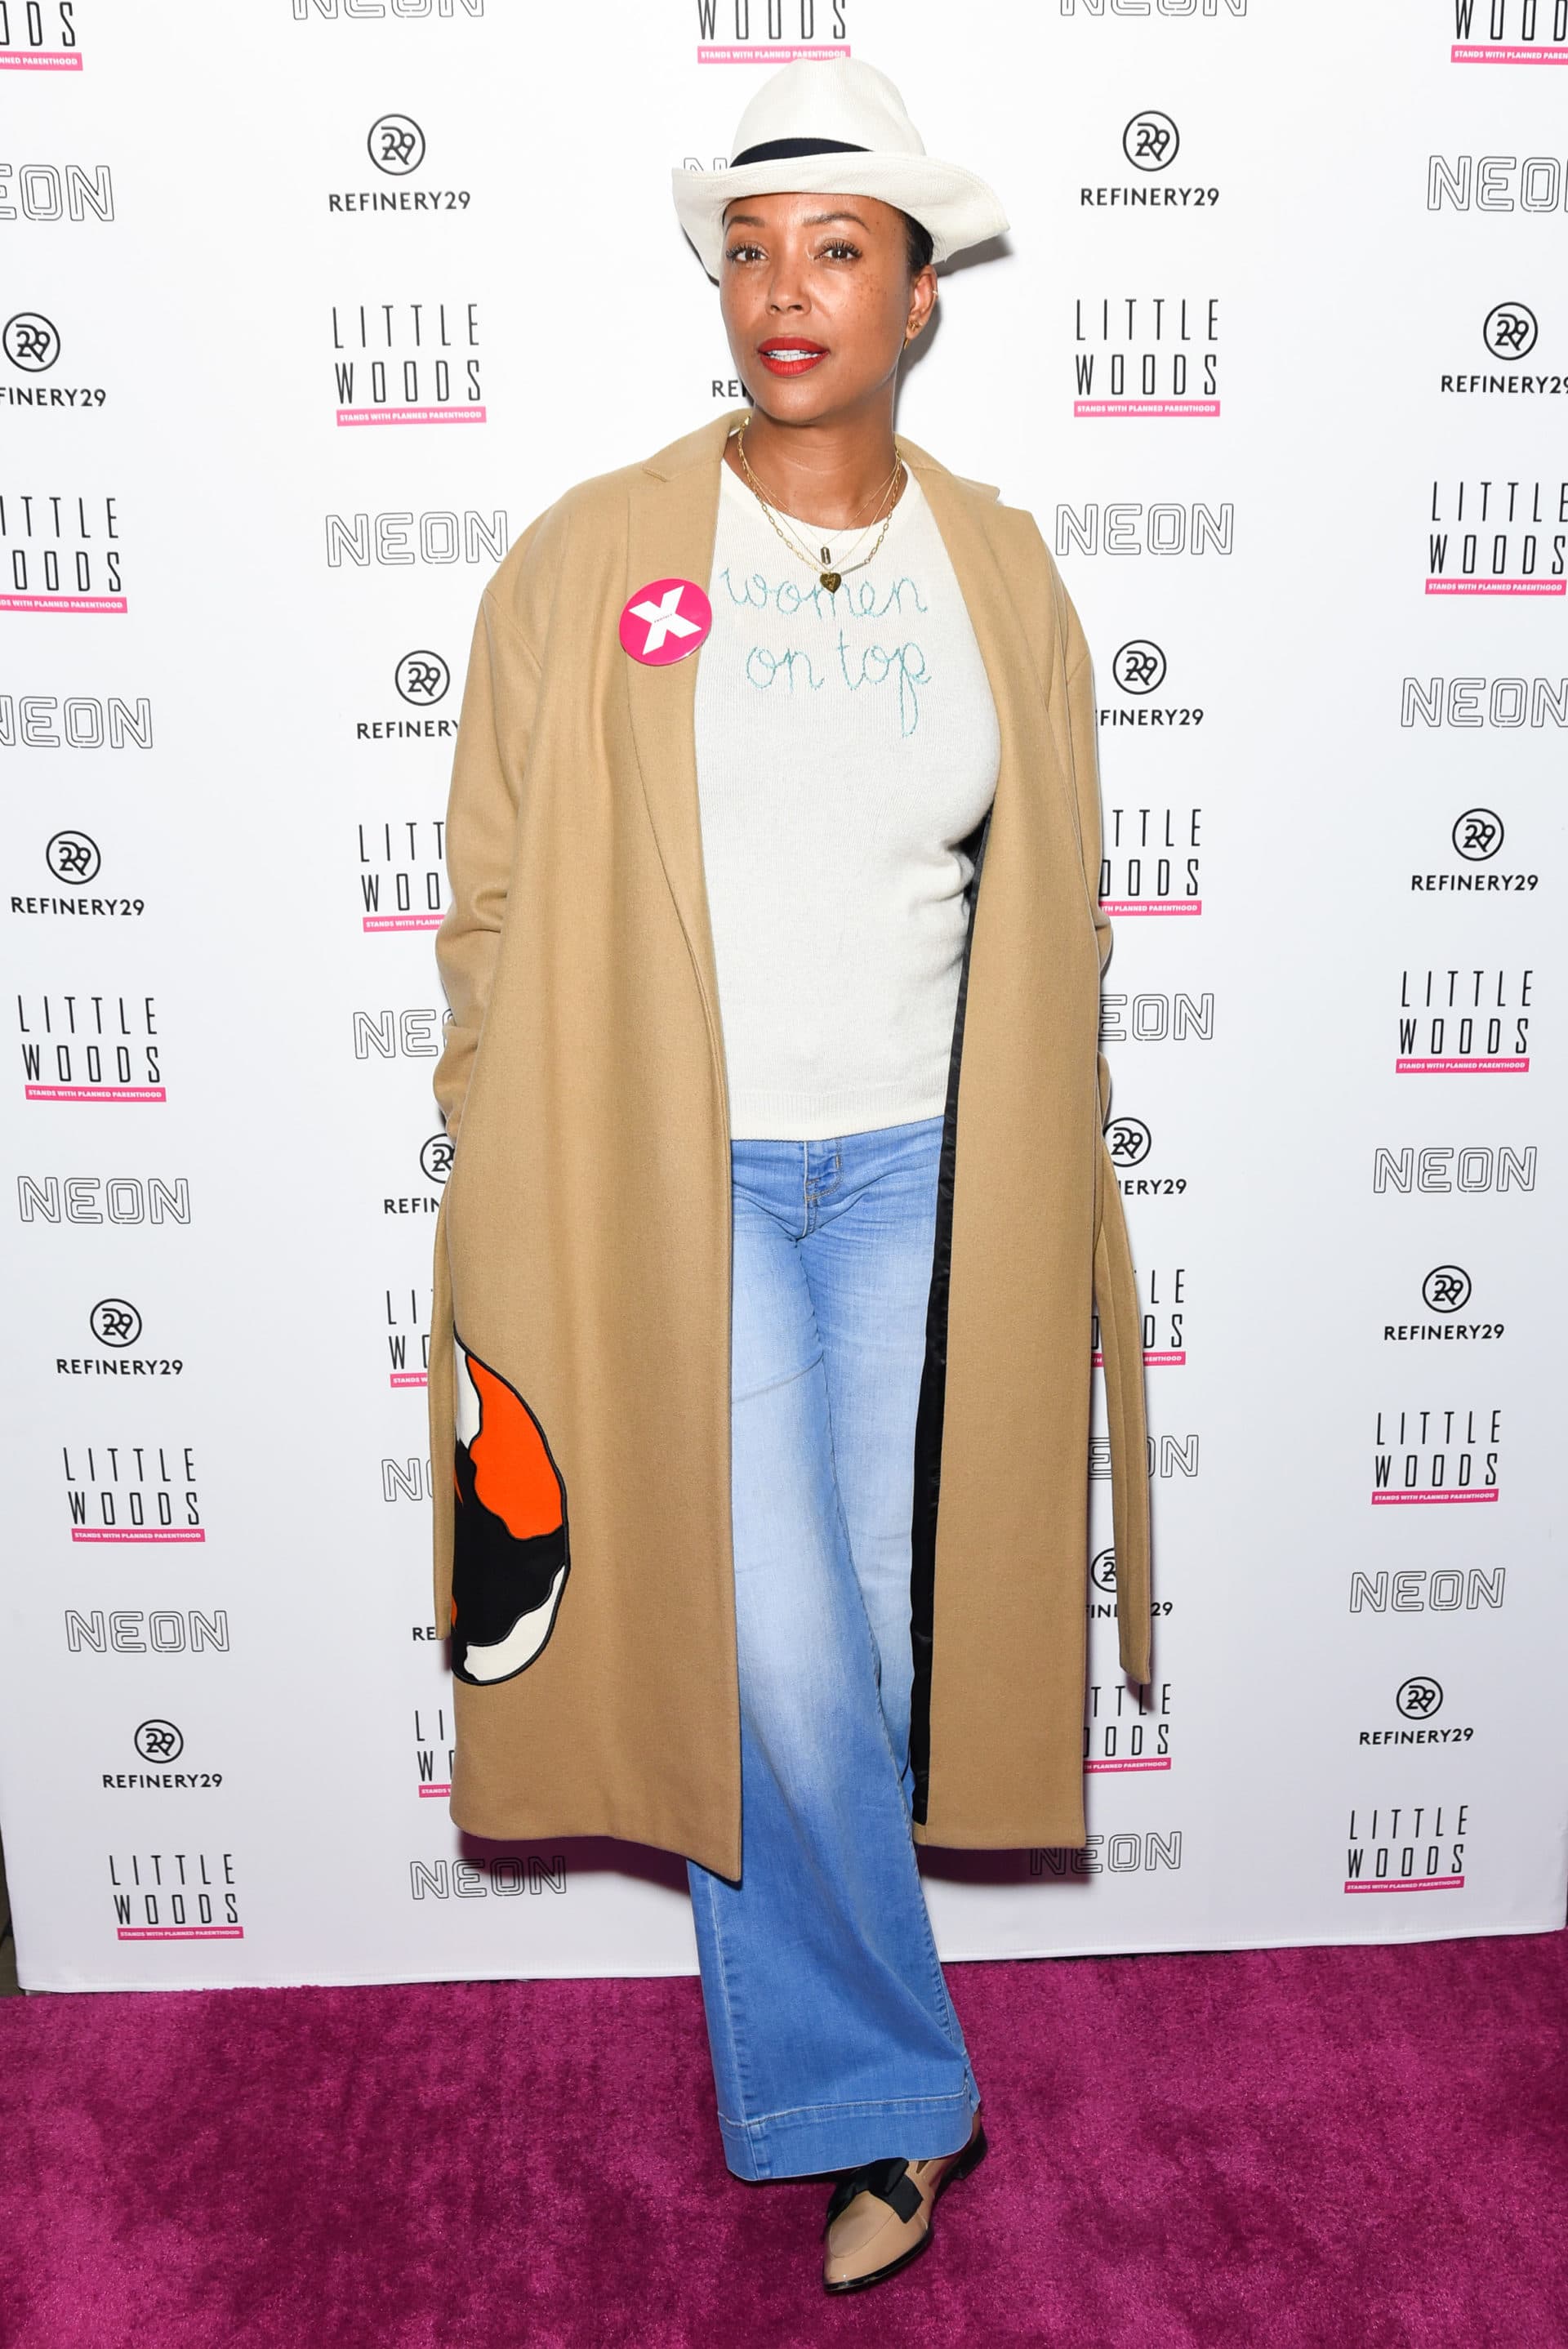 Regina Hall, Marsai Martin, Issa Rae, And More Celebs Out And About